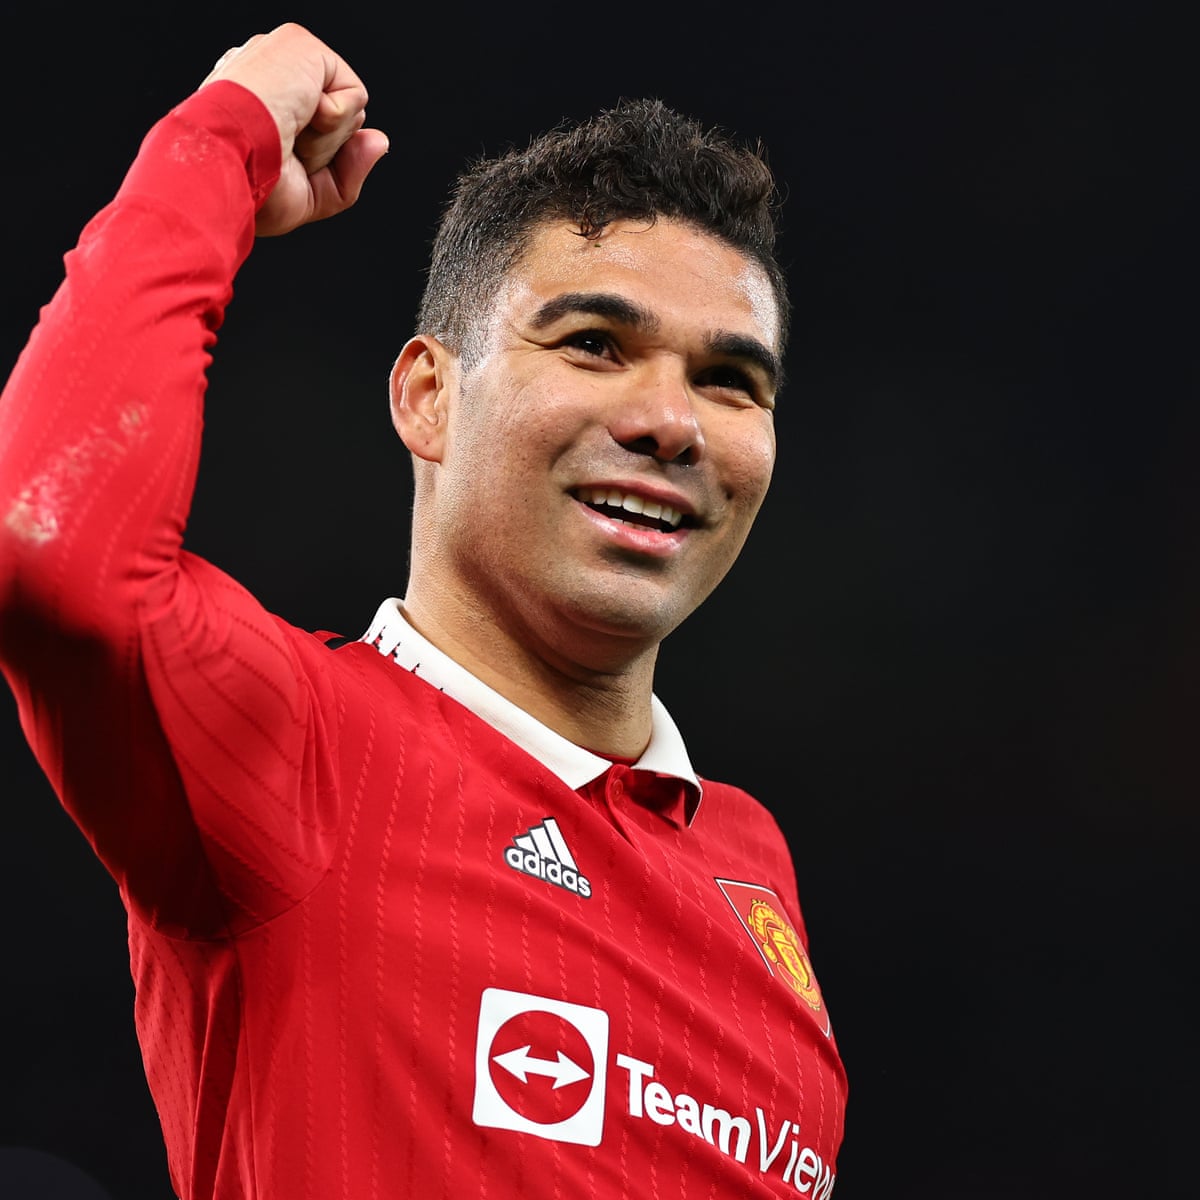 Guard dog with a difference: Casemiro silences doubters to lift Old  Trafford | Manchester United | The Guardian